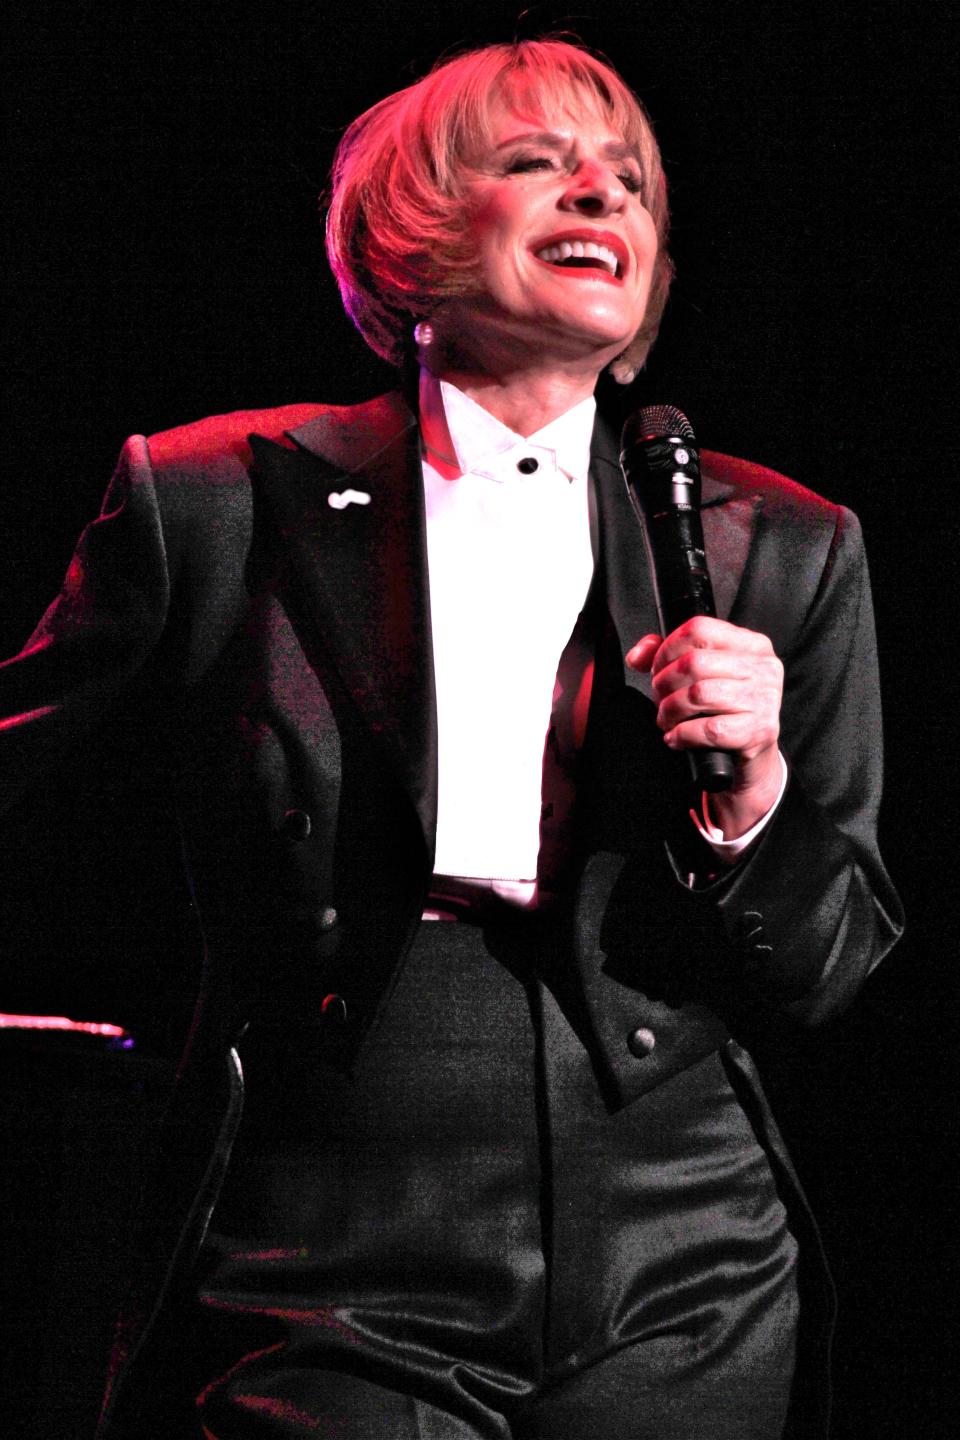 Patti Lupone performs "Don't Mess with Broadway" at The Tilles Center in Brookville, N.Y., on March 19, 2023.